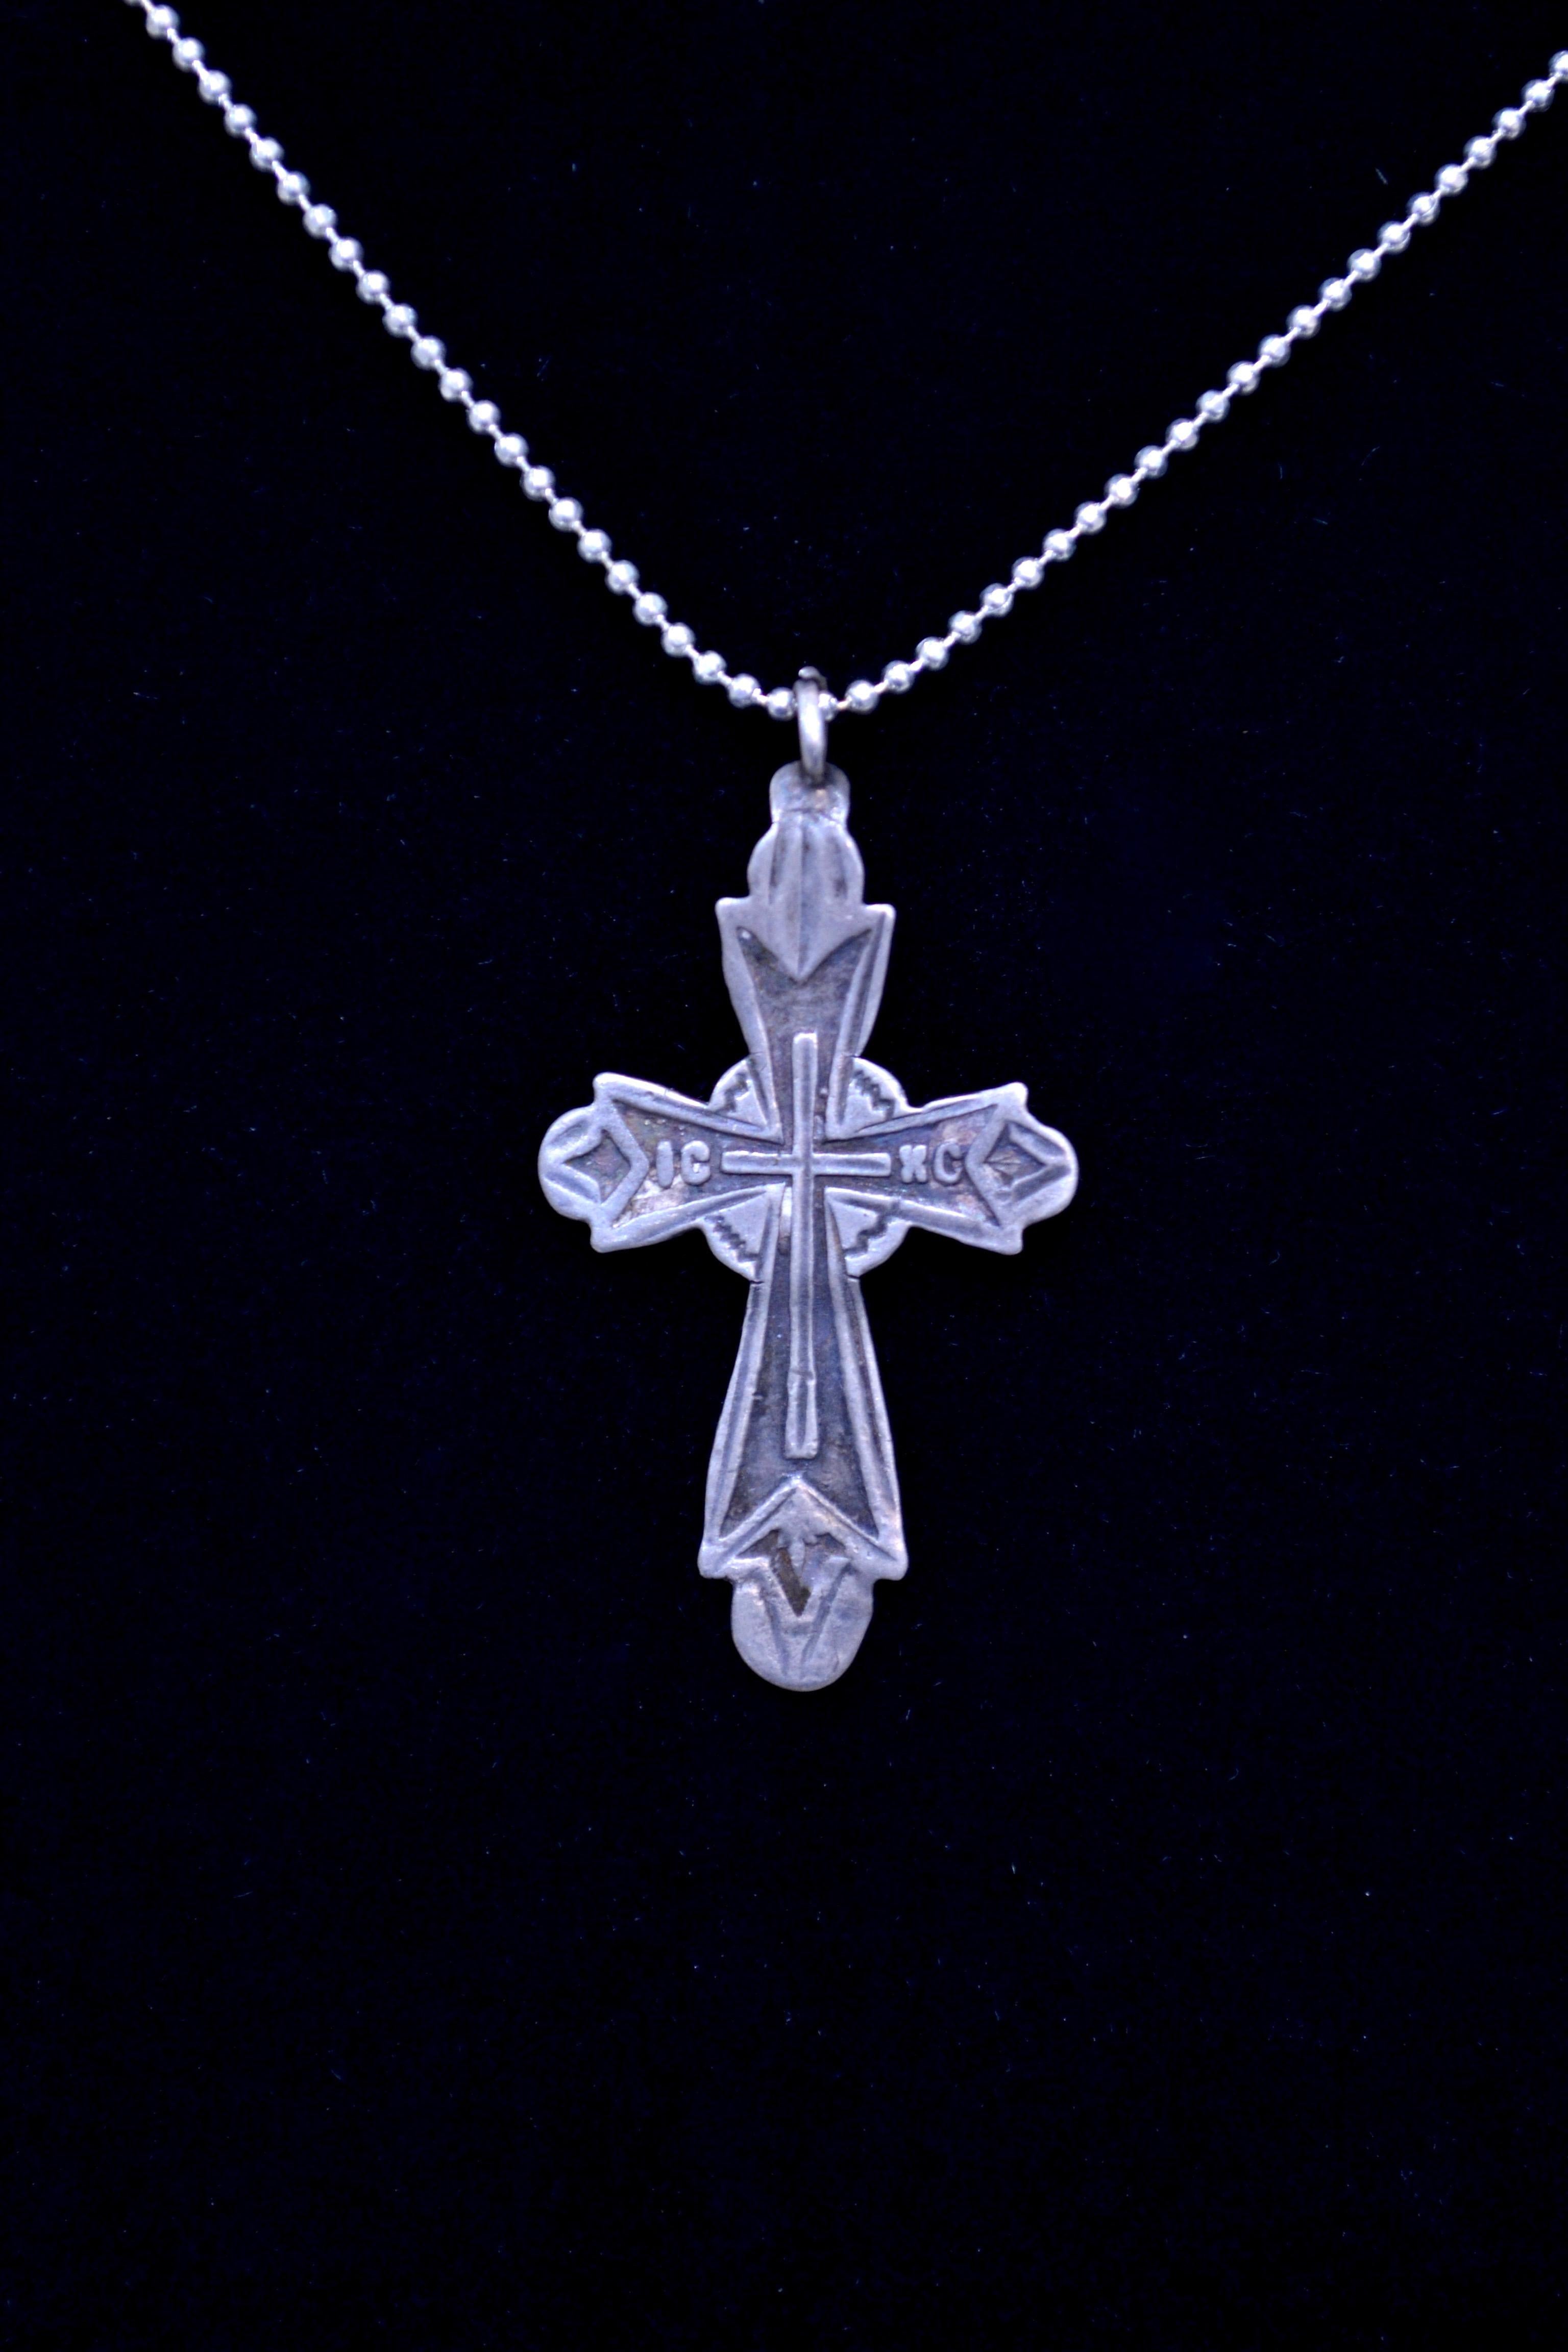 Post Medieval Silver Cross with Hallmark. Professionally cleaned and polished to show original details. Obtained from an old British collection, acquired from the L.C.F. (London)